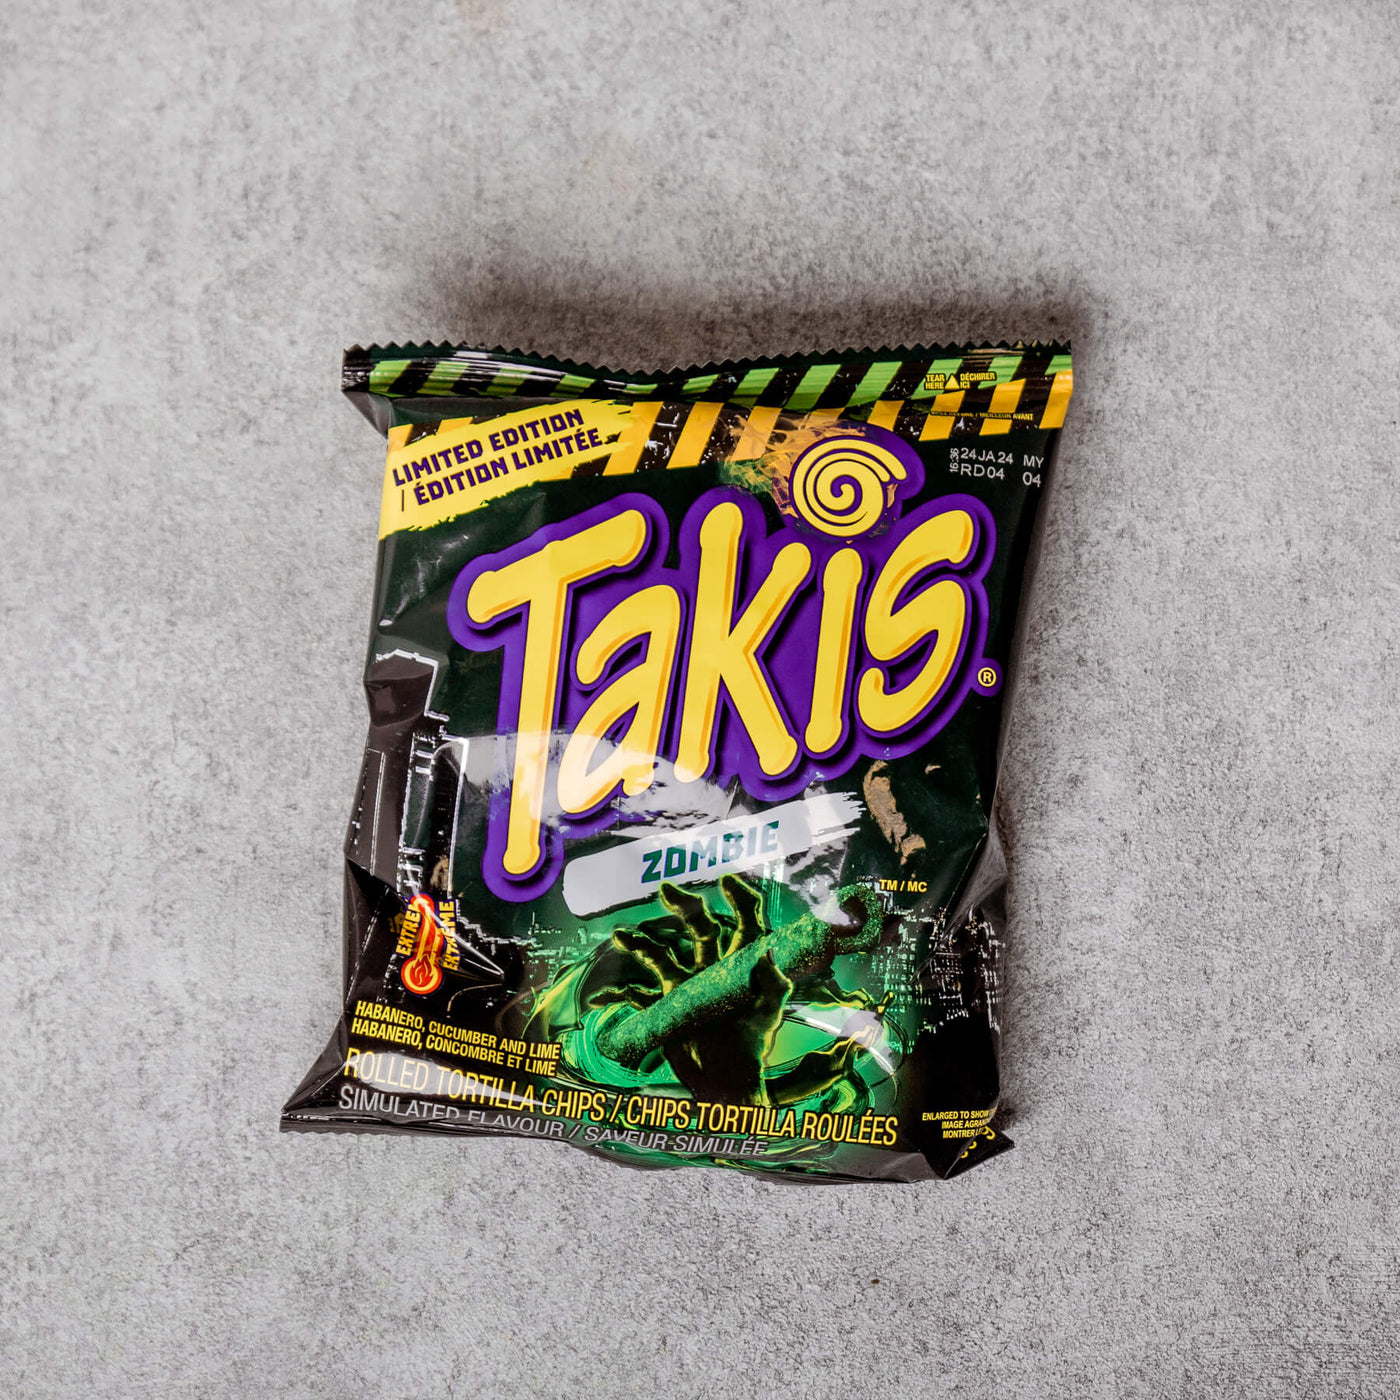 Takis - Rolled Tortilla Chips (Zombie) Limited Edition